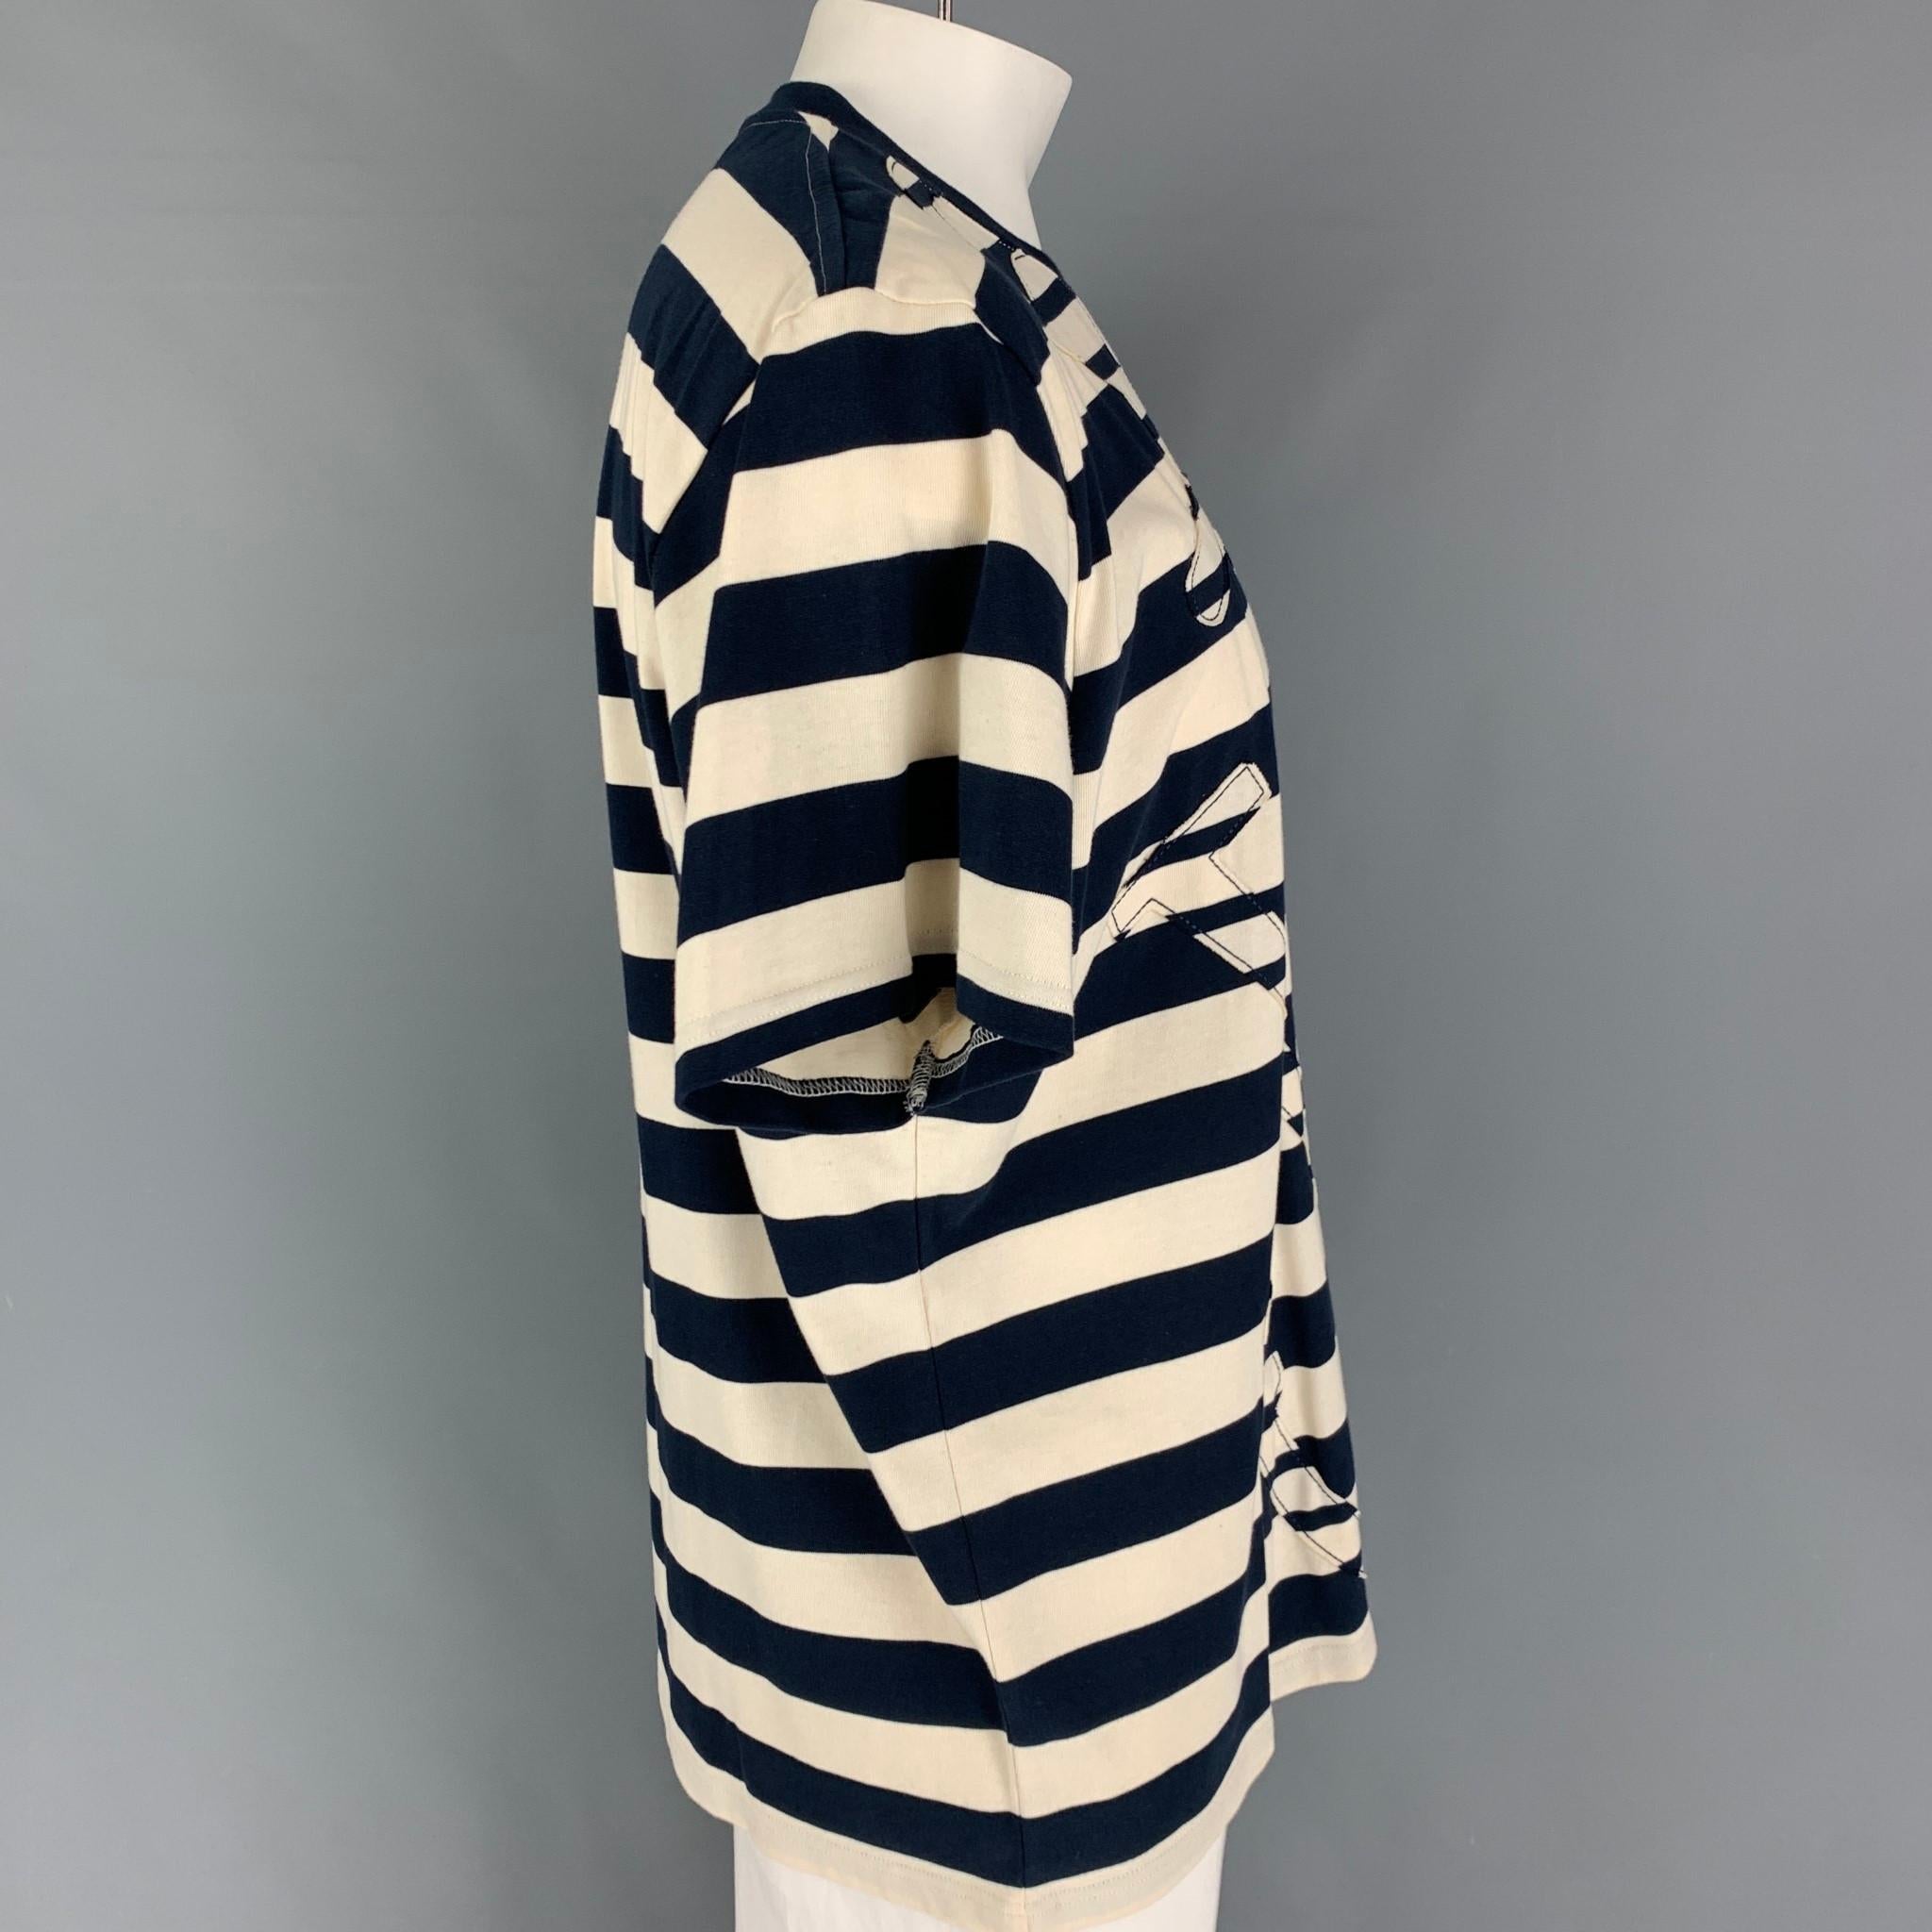 J.W. ANDERSON t-shirt comes in a navy & cream stripe cotton featuring a nautical style, anchor patch, and a crew-neck. 
 

Very Good Pre-Owned Condition.
Marked: L

Measurements:

Shoulder: 21 in.
Chest: 50 in.
Sleeve: 9.5 in.
Length: 29 in. 